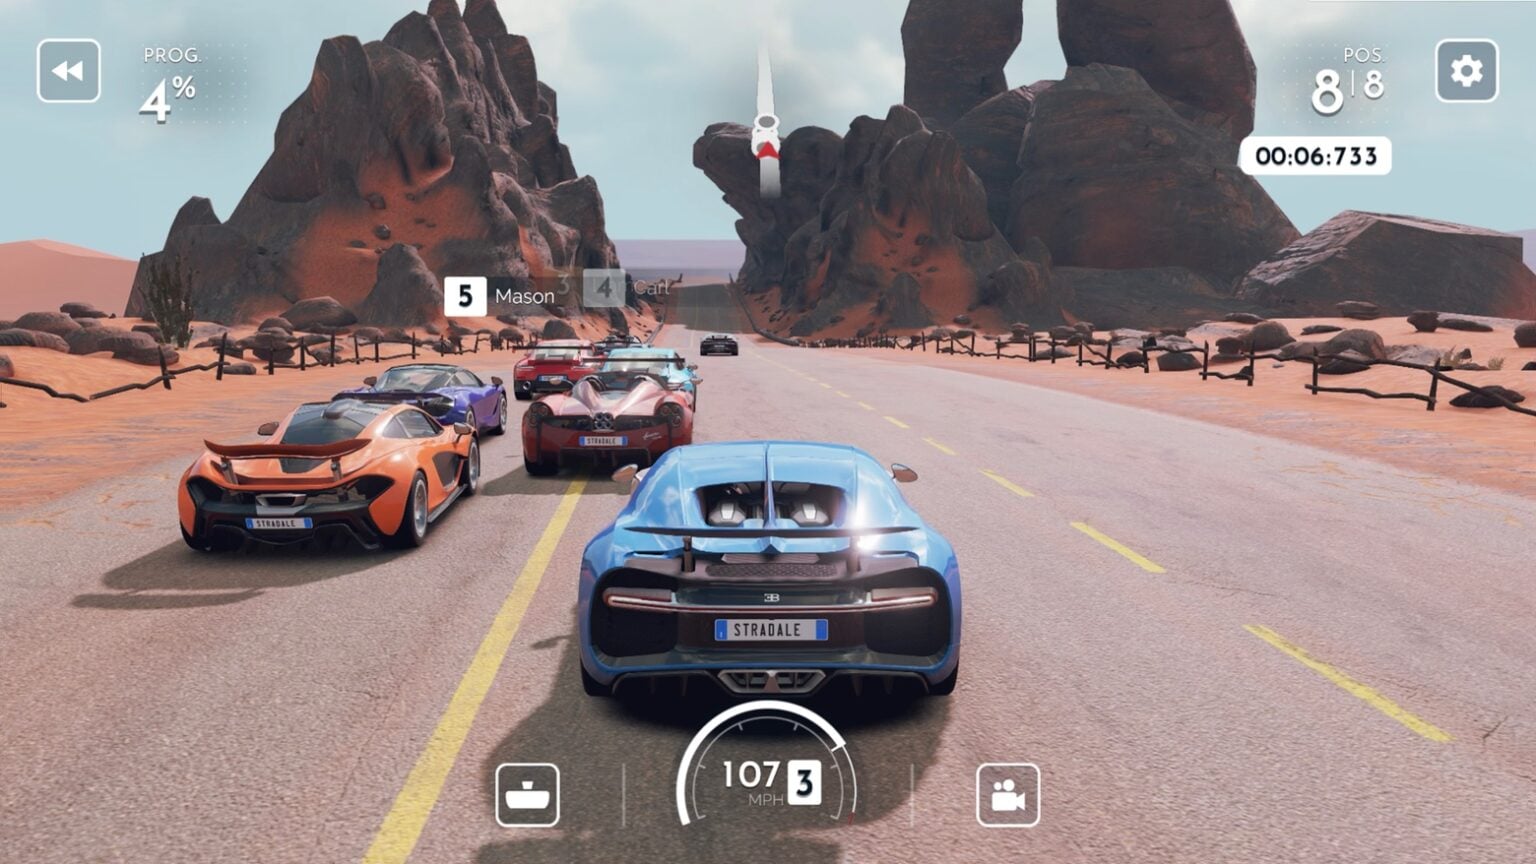 Collect and race gorgeous supercars in ‘Gear.Club Stradale’ on Apple Arcade